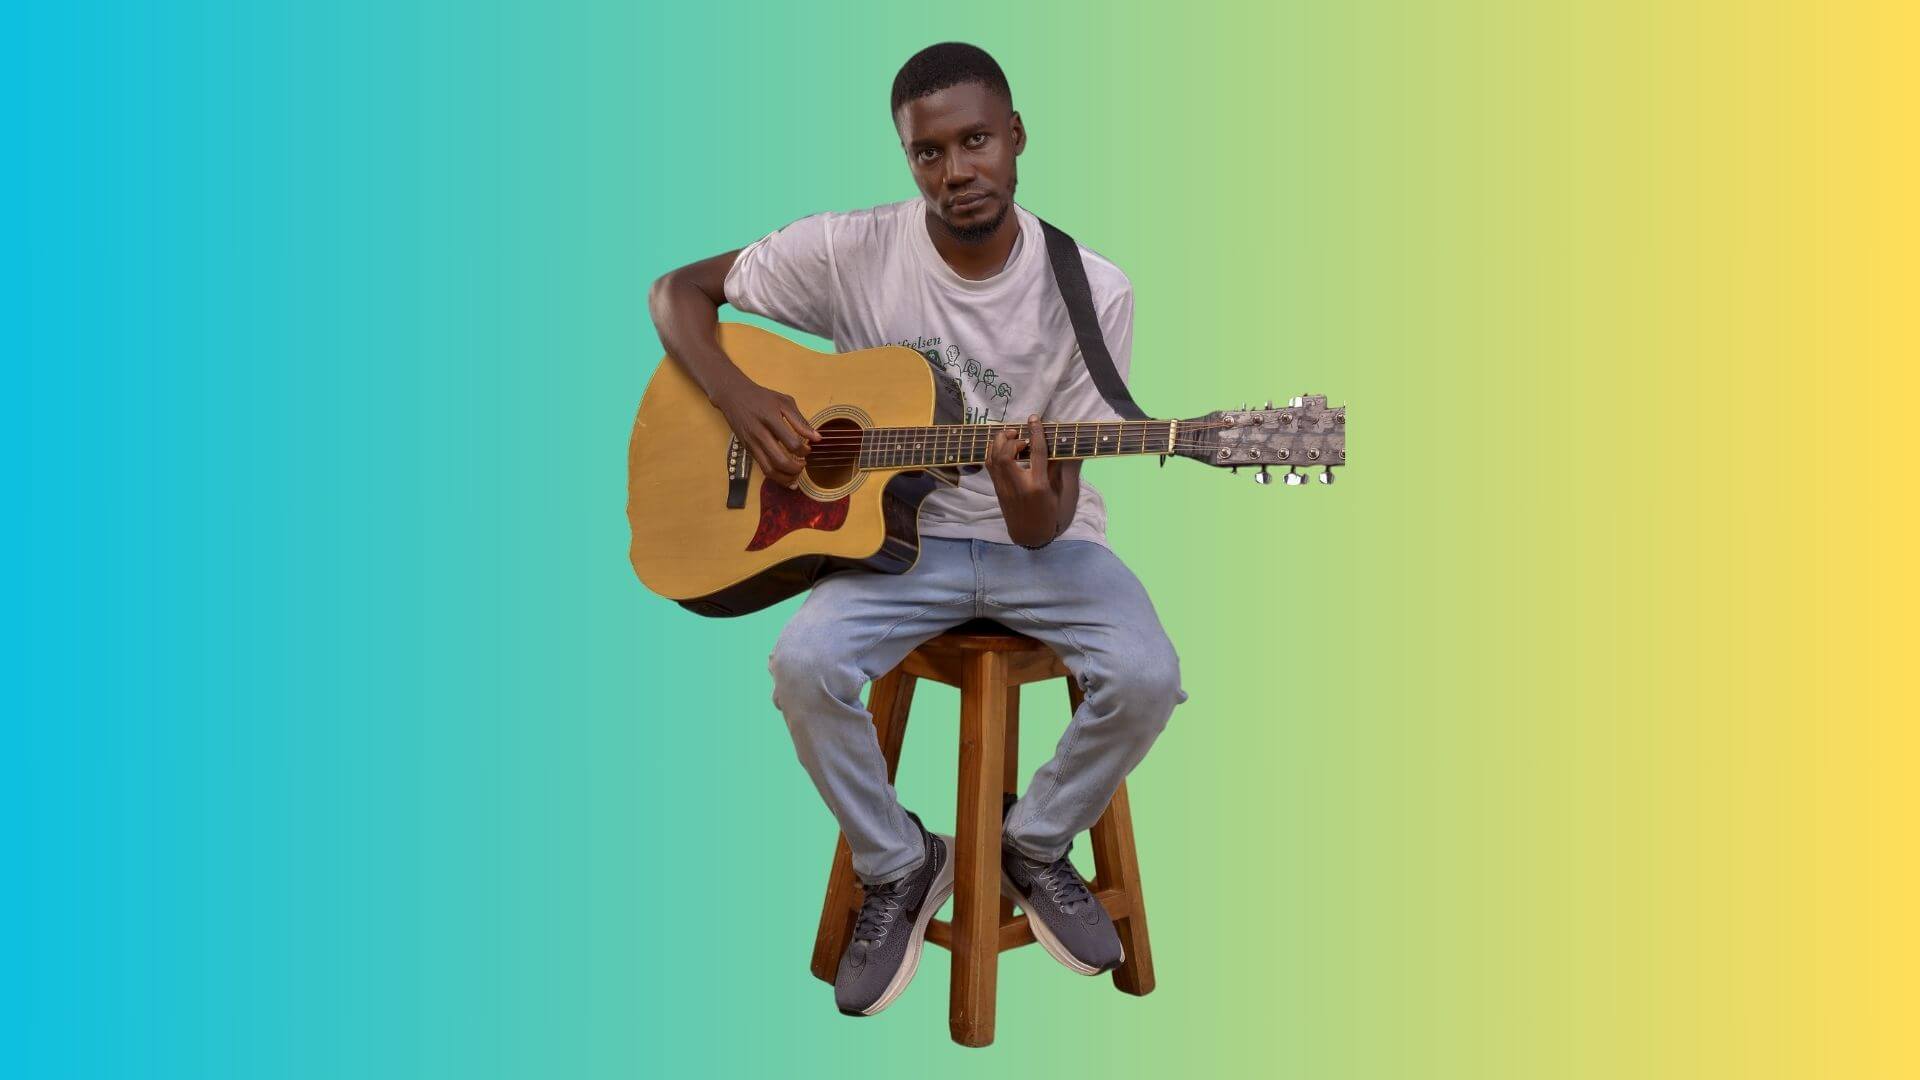 Explore the music of Sparoxzy, an Indie/Alternative artist known for his soulful melodies and inspiring lyrics. Discover his journey, influences, latest single "Life's Symphony," and his vision for uplifting Nigerian music.